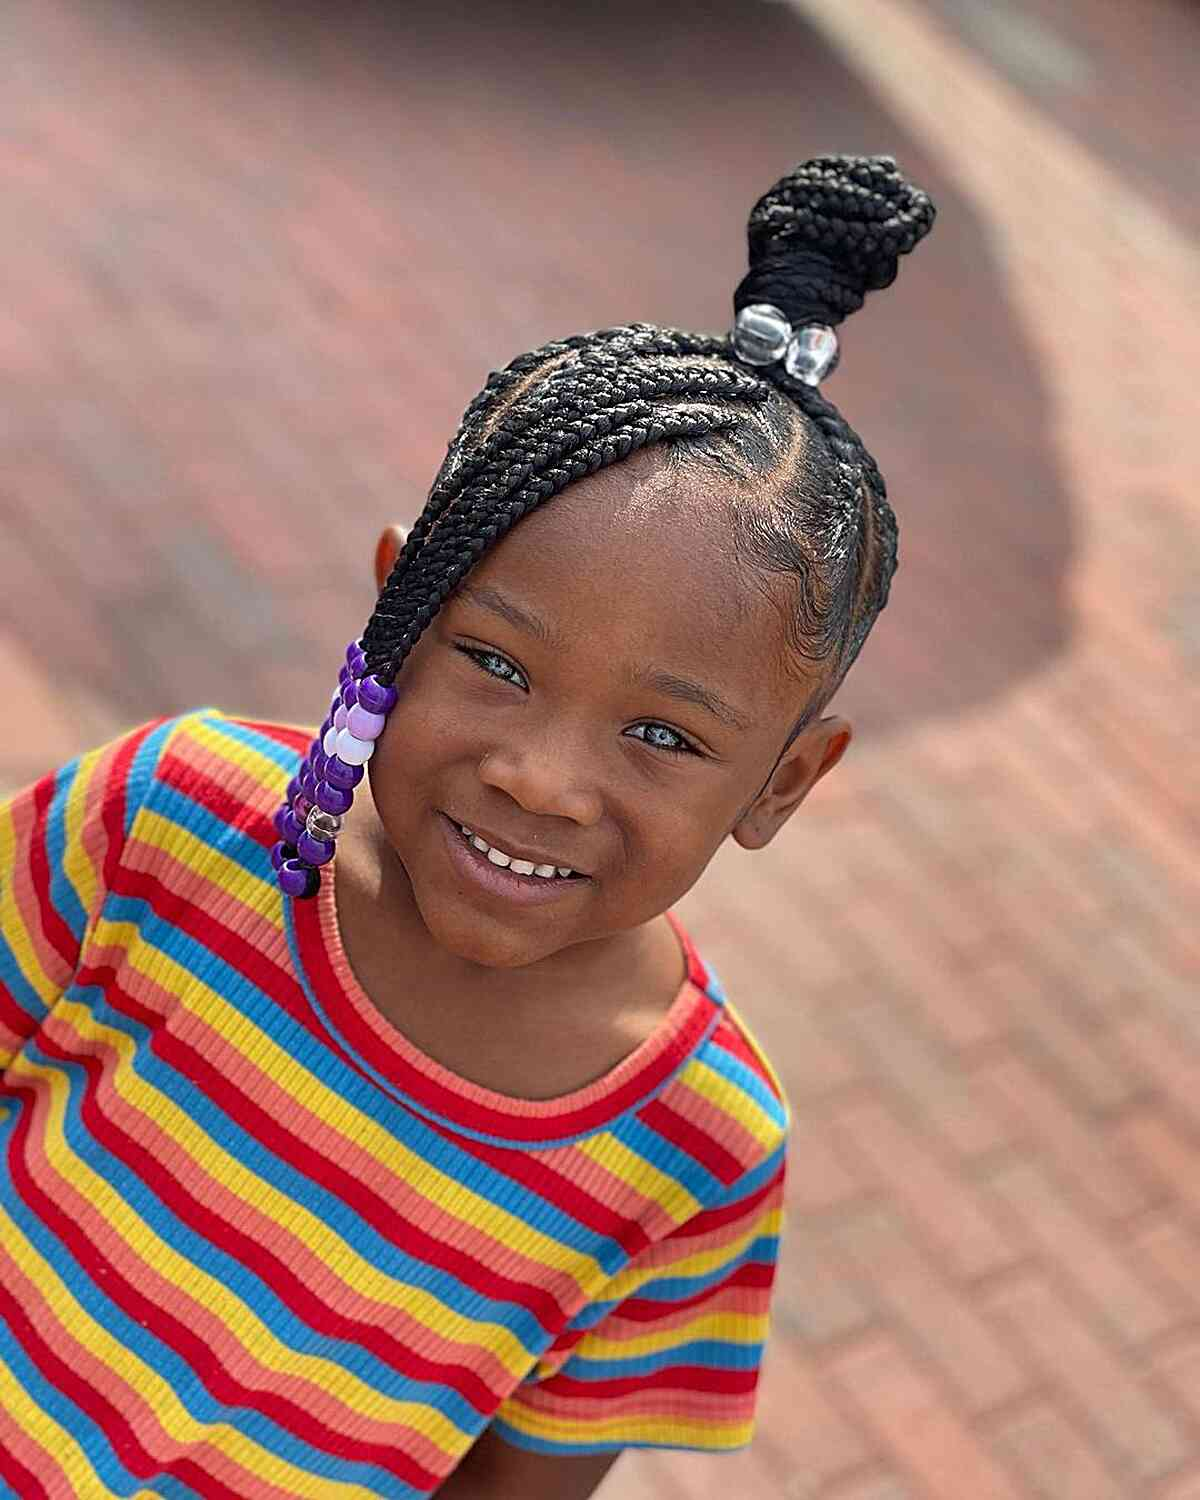 Black girls hairstyle:  Picture of a little girl rocking braids with beads